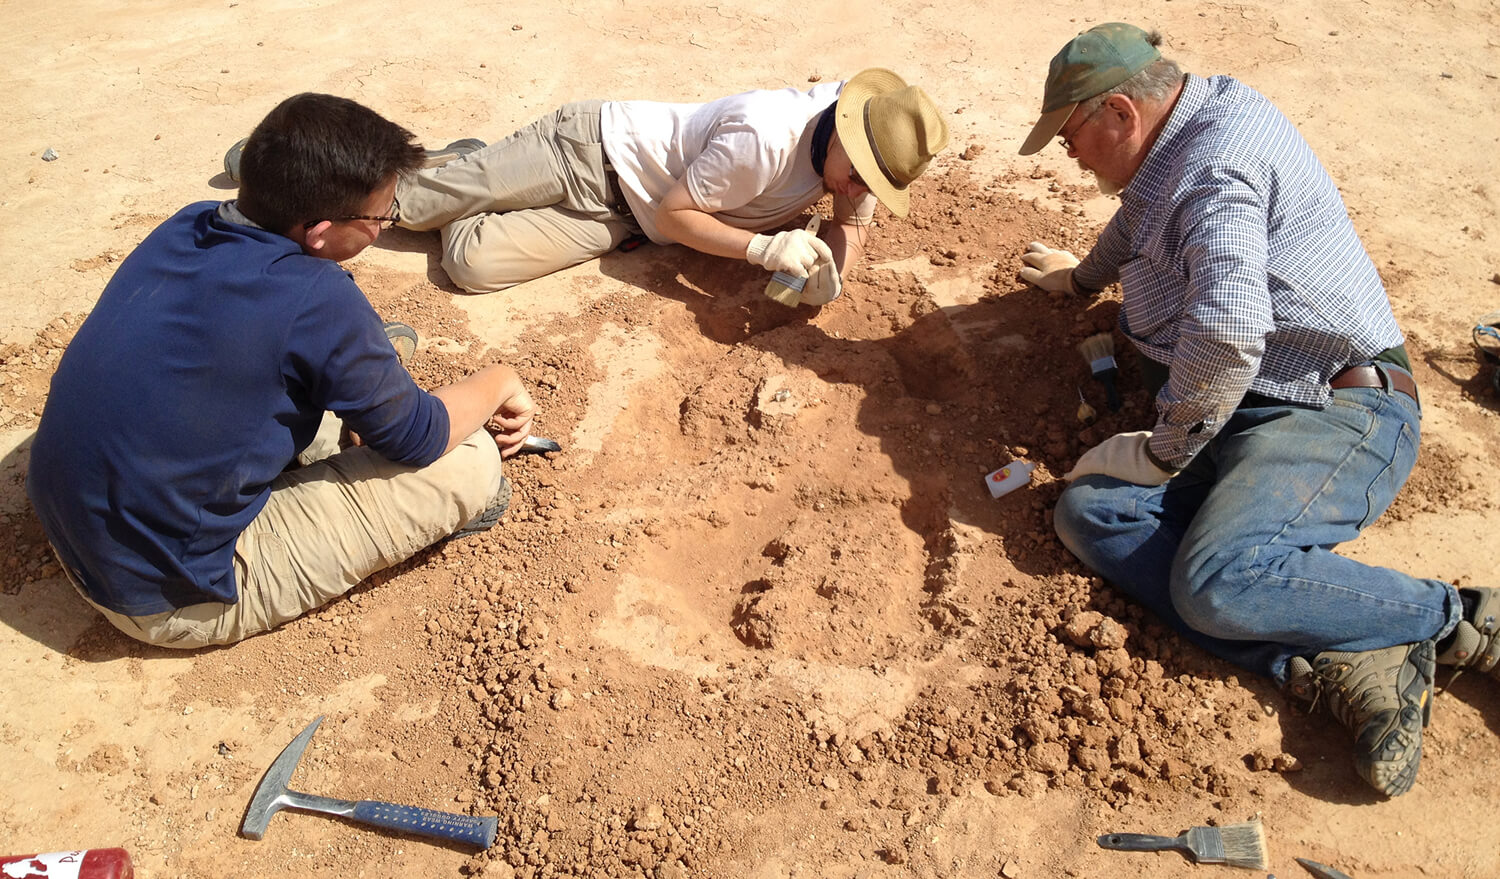 In 2015 on a field excursion to China’s Gansu Province, Dodson (right) observes as students Tanner Frank and Adam Laing work carefully to extract a small dinosaur’s femur and vertebrae from the earth. (Image: Steven Jasinski)